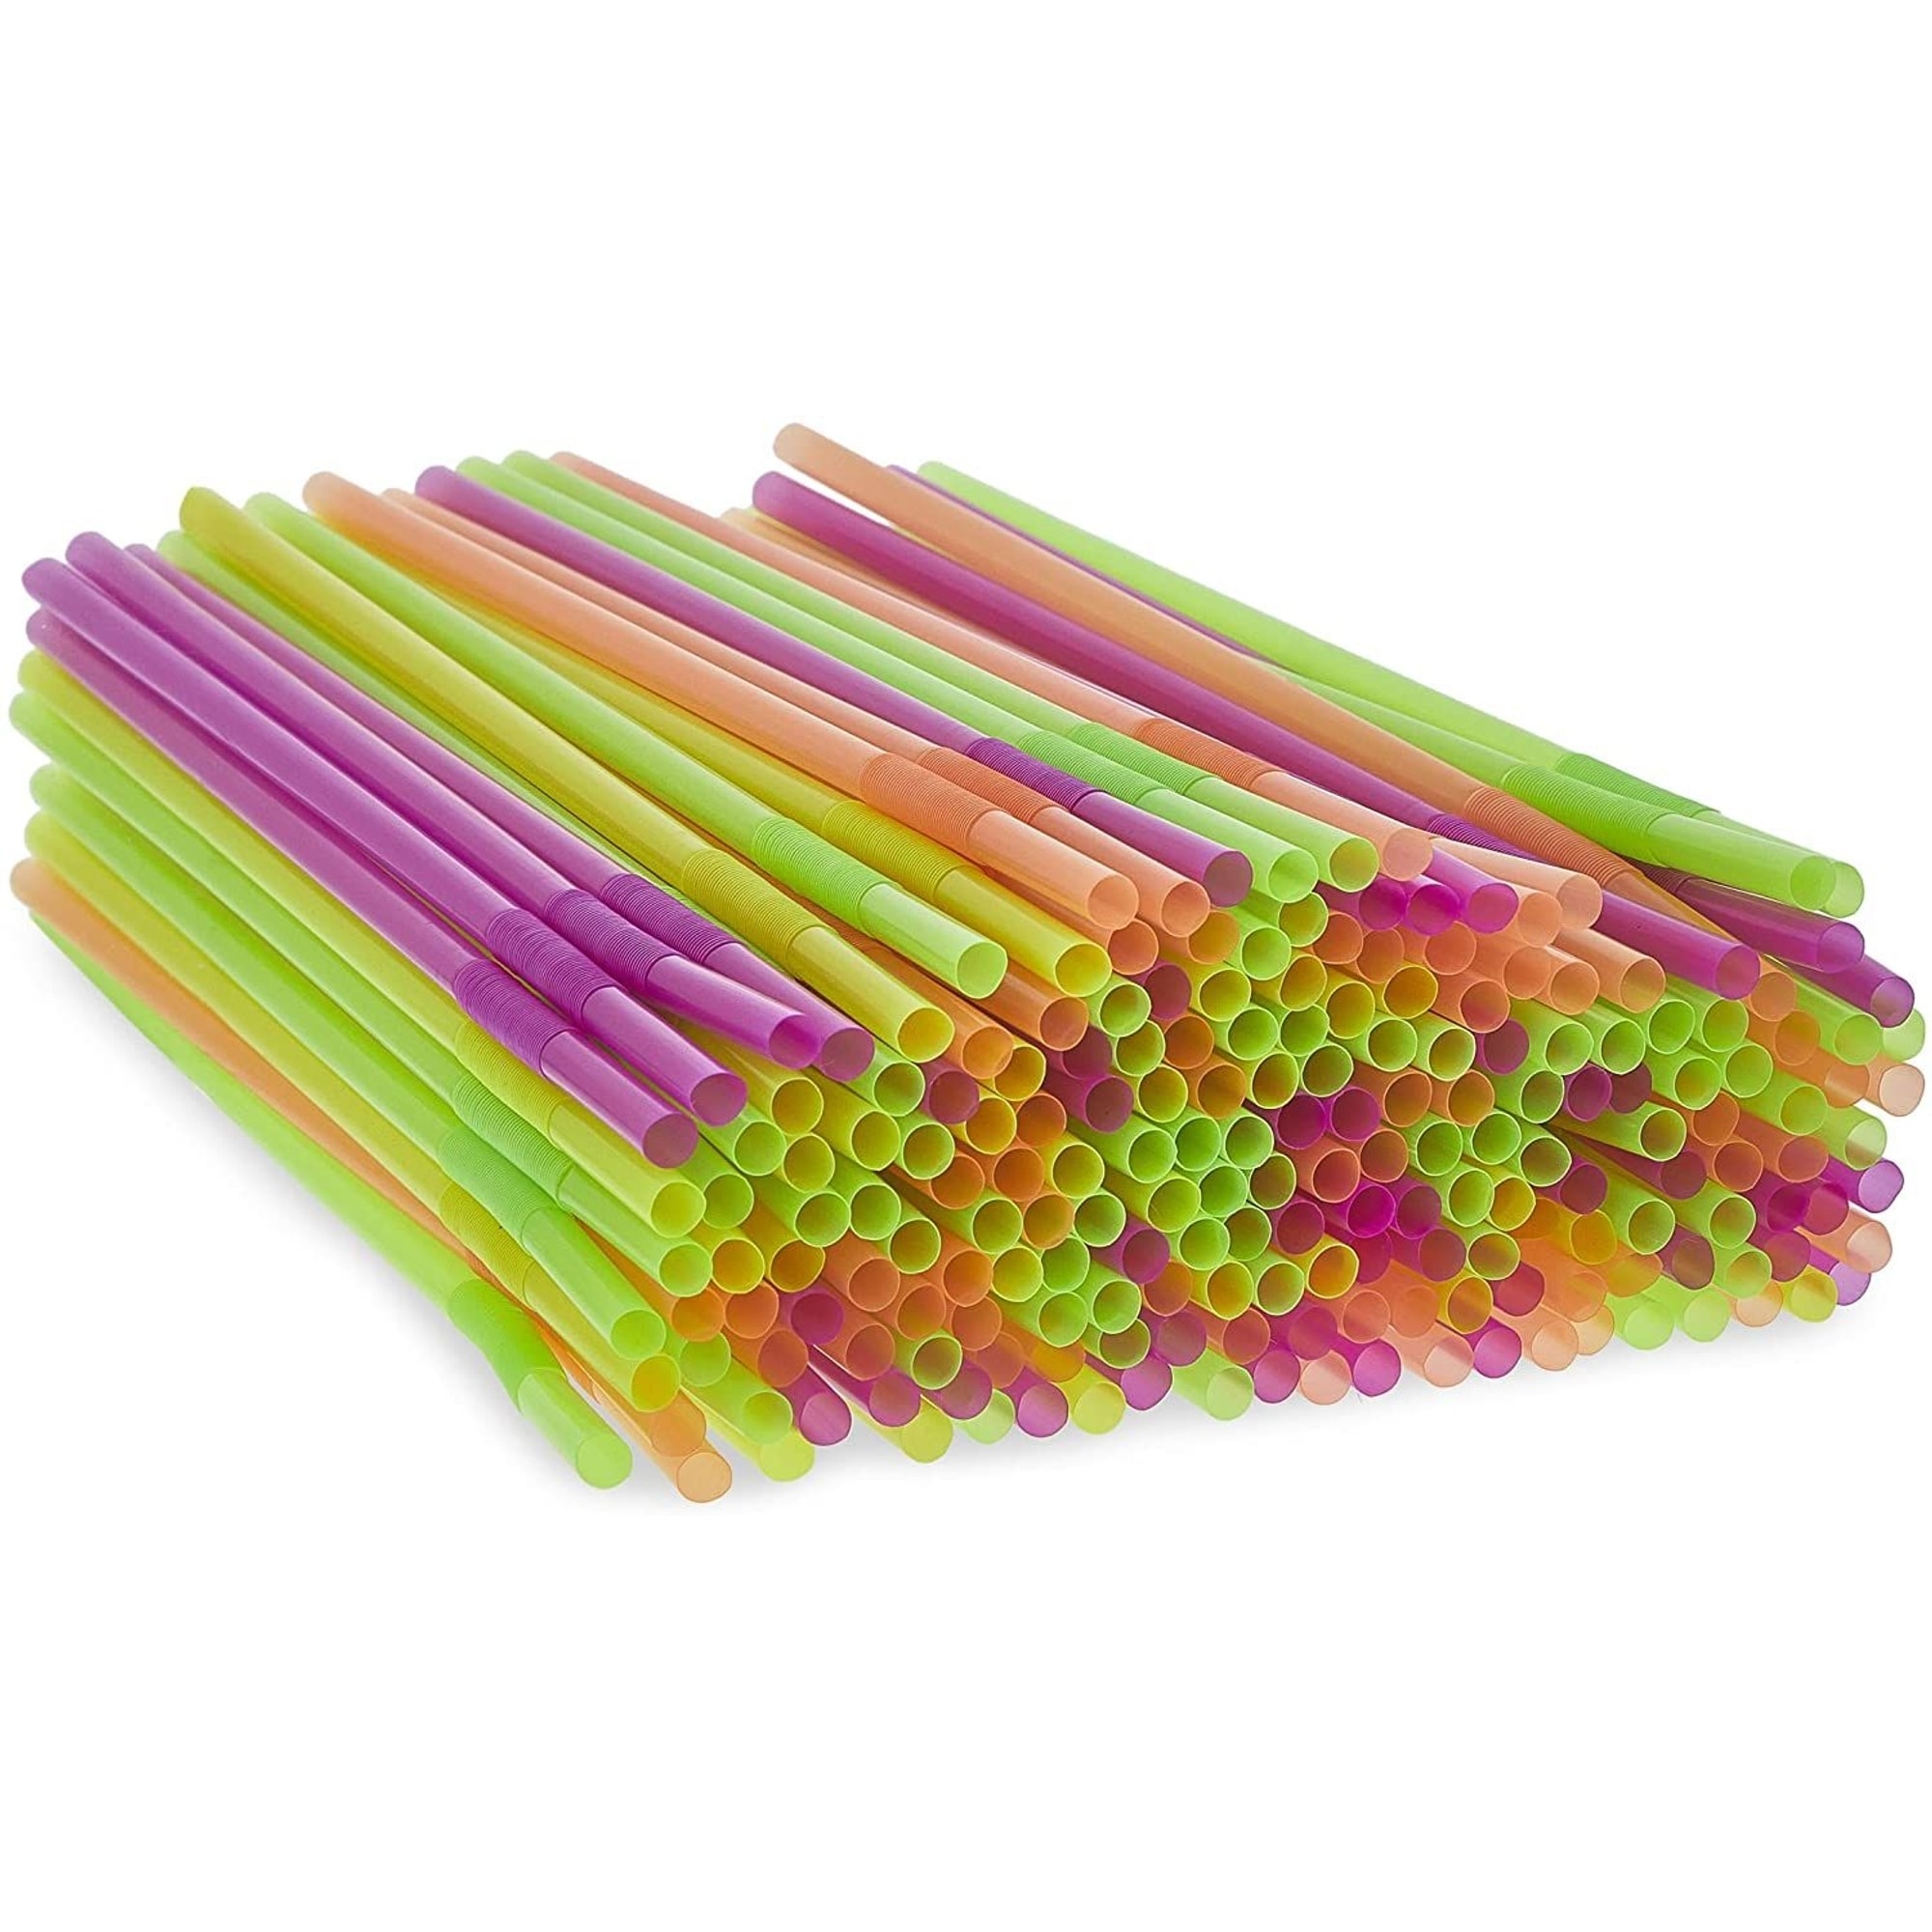 https://ak1.ostkcdn.com/images/products/is/images/direct/396df0024596e8eb5386a07e2daf01feed7c4e54/Plastic-Drinking-Straws%2C-Single-Use-Bendable-Straws-%284-Colors%2C-13-In%2C-200-Pack%29.jpg